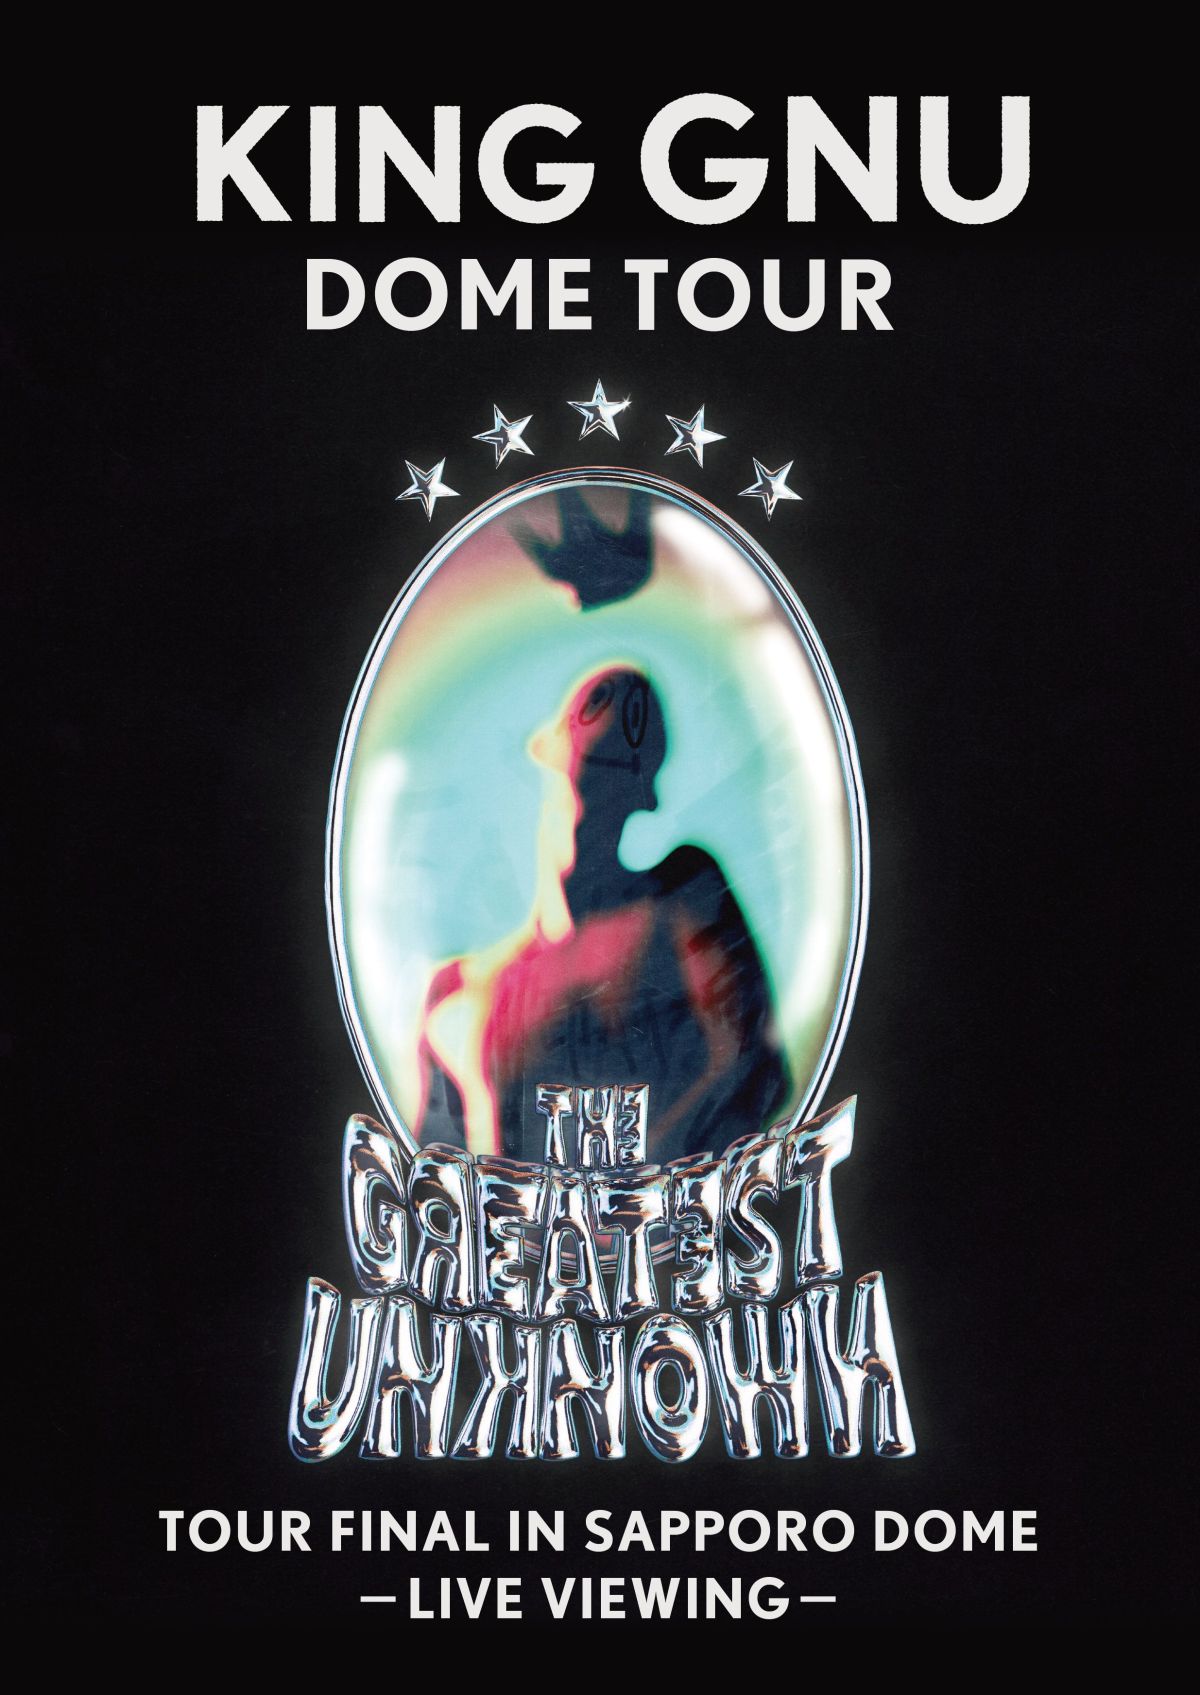 Live viewing and online live performance of the final Sapporo Dome performance of “King Gnu Dome Tour “THE GREATEST UNKNOWN” on Saturday, March 23rd has been decided!